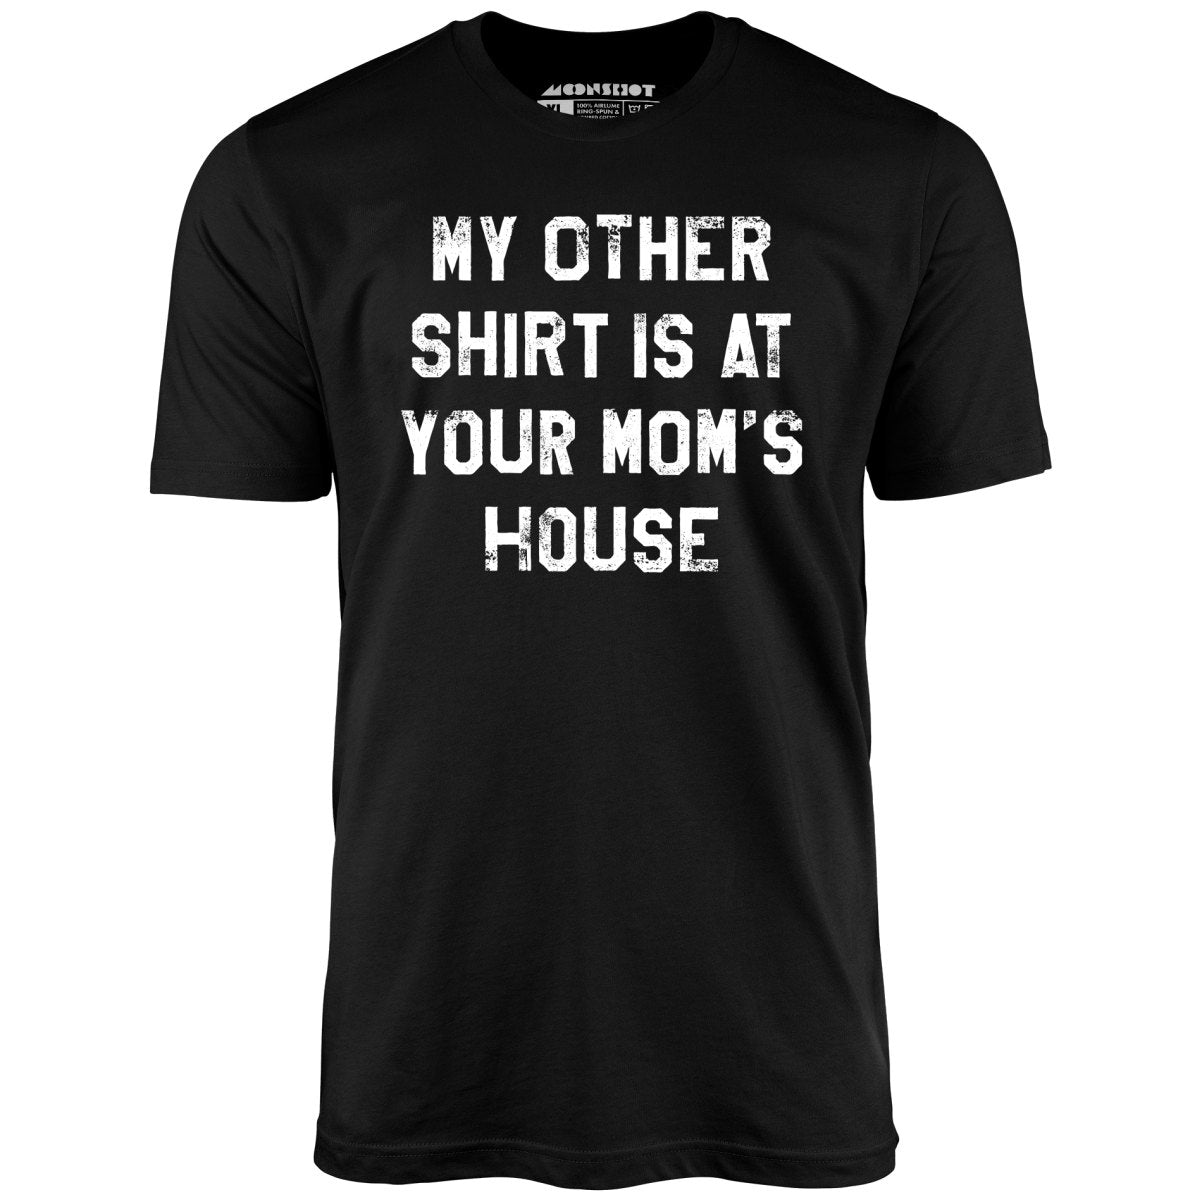 My Other Shirt Is At Your Mom's House - Unisex T-Shirt